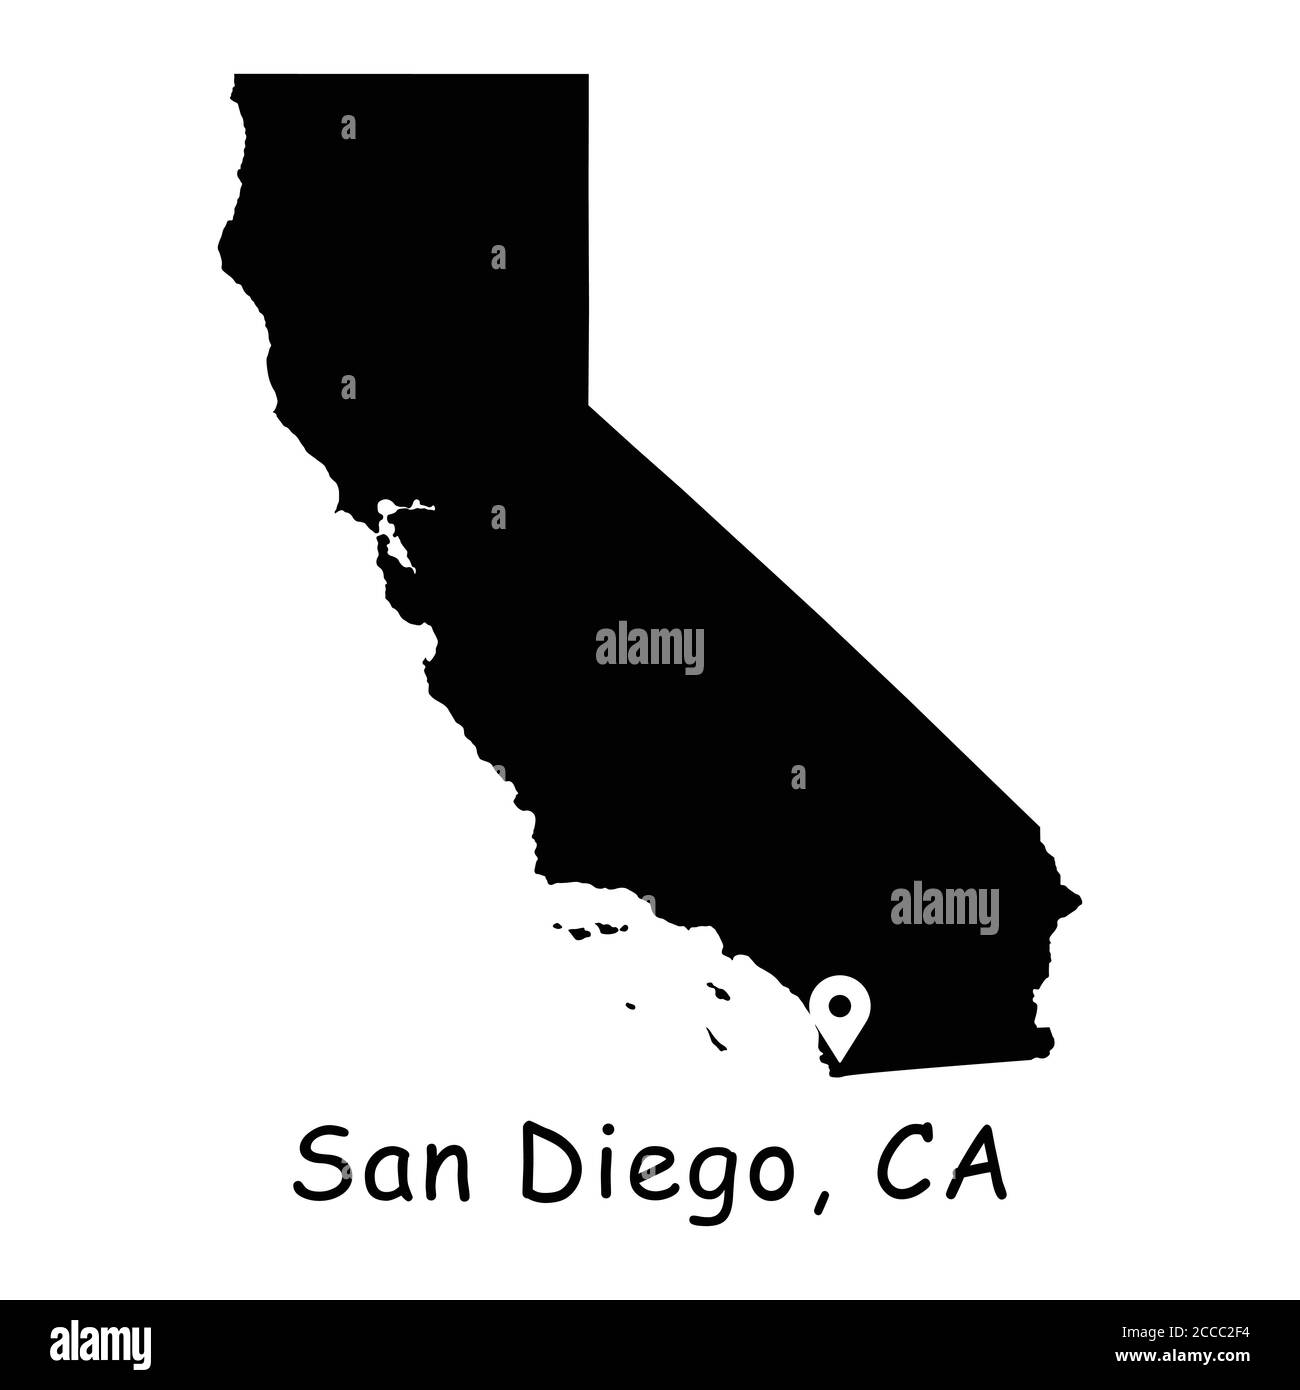 San Diego on California State Map. Detailed CA State Map with Location Pin on San Diego City. Black silhouette vector map isolated on white background Stock Vector